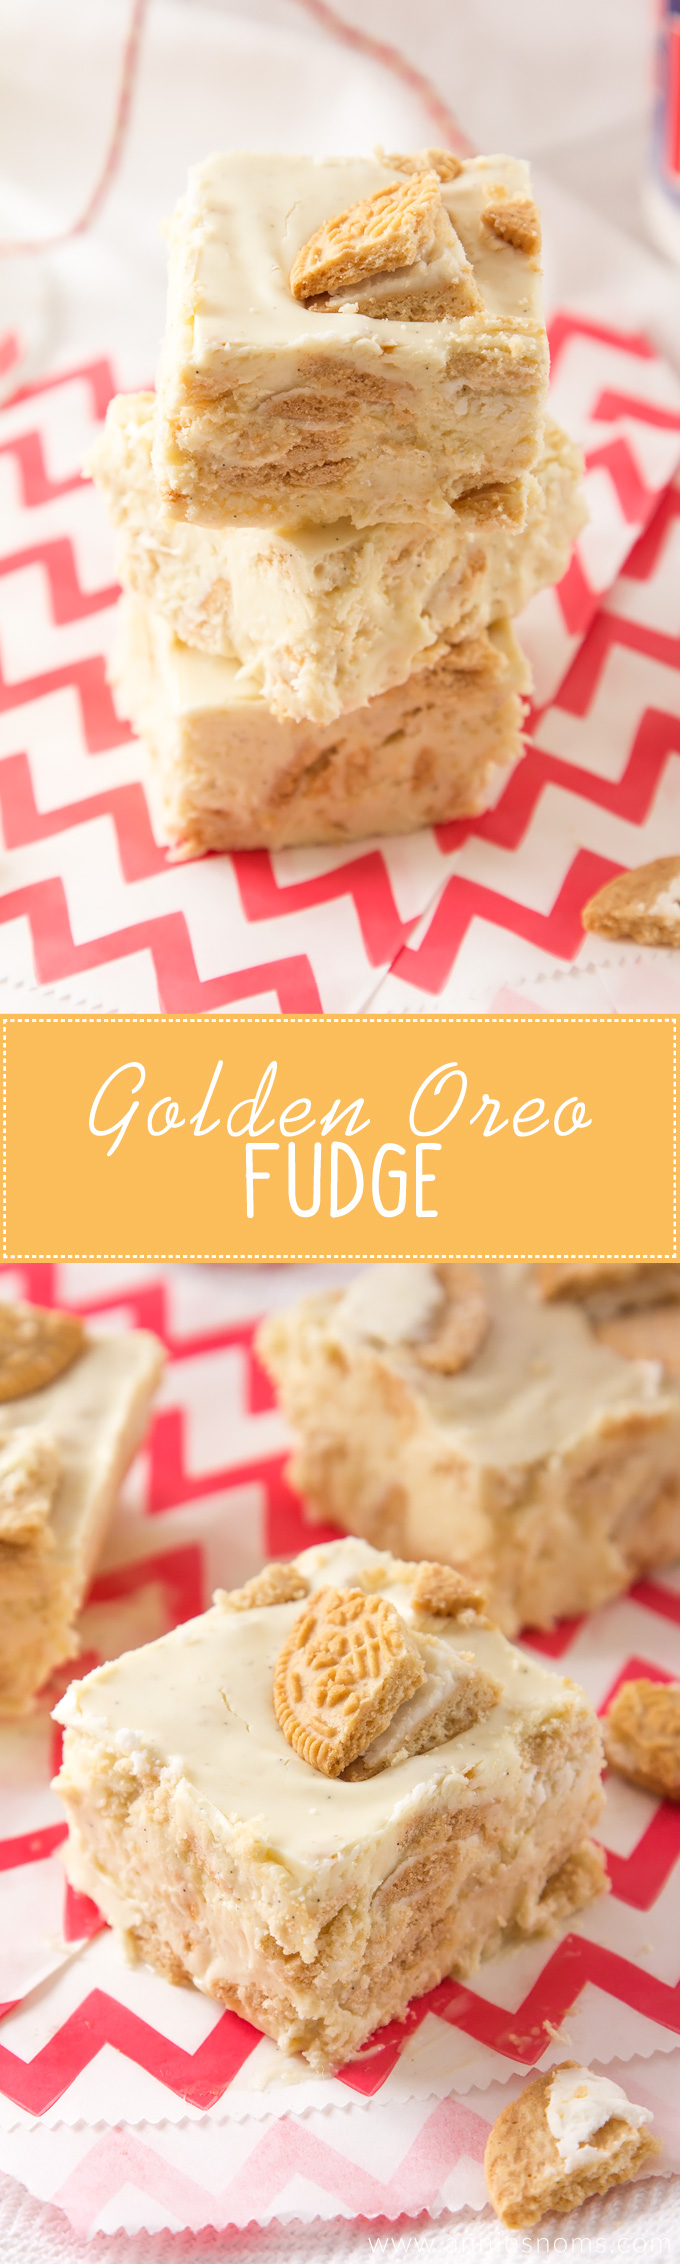 This melt in your mouth fudge is jam packed with Golden Oreo's, chocolate and marshmallow fluff. It's easy to make, hard to resist and totally divine!